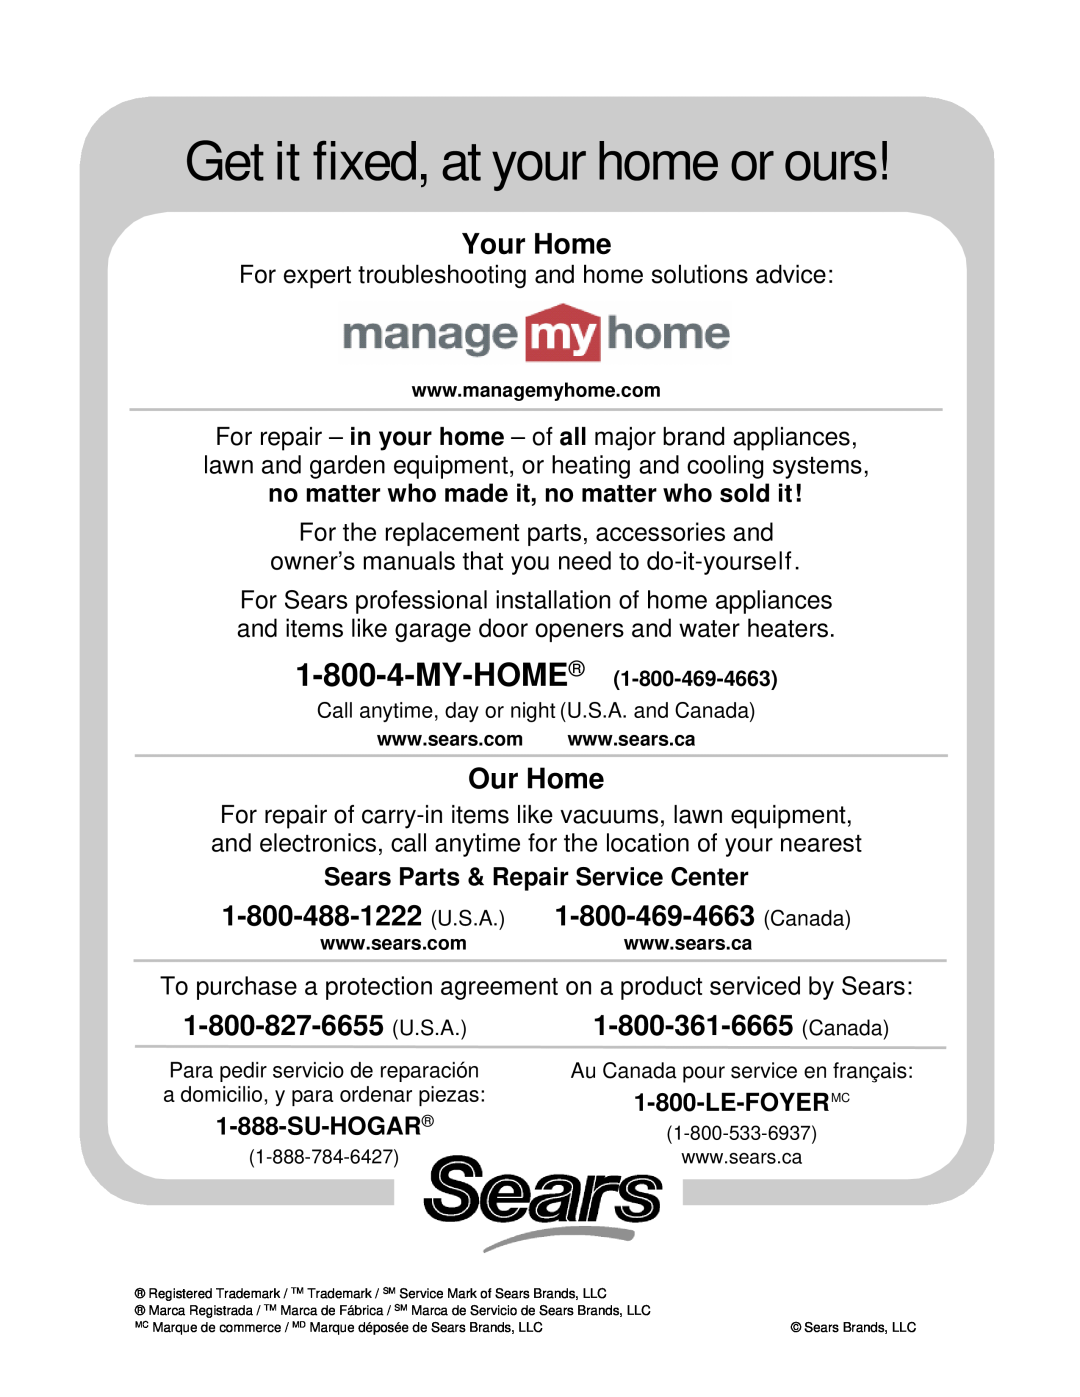 Kenmore 241815202 Get it fixed, at your home or ours, Your Home, Our Home, Sears Parts & Repair Service Center, Su-Hogar 